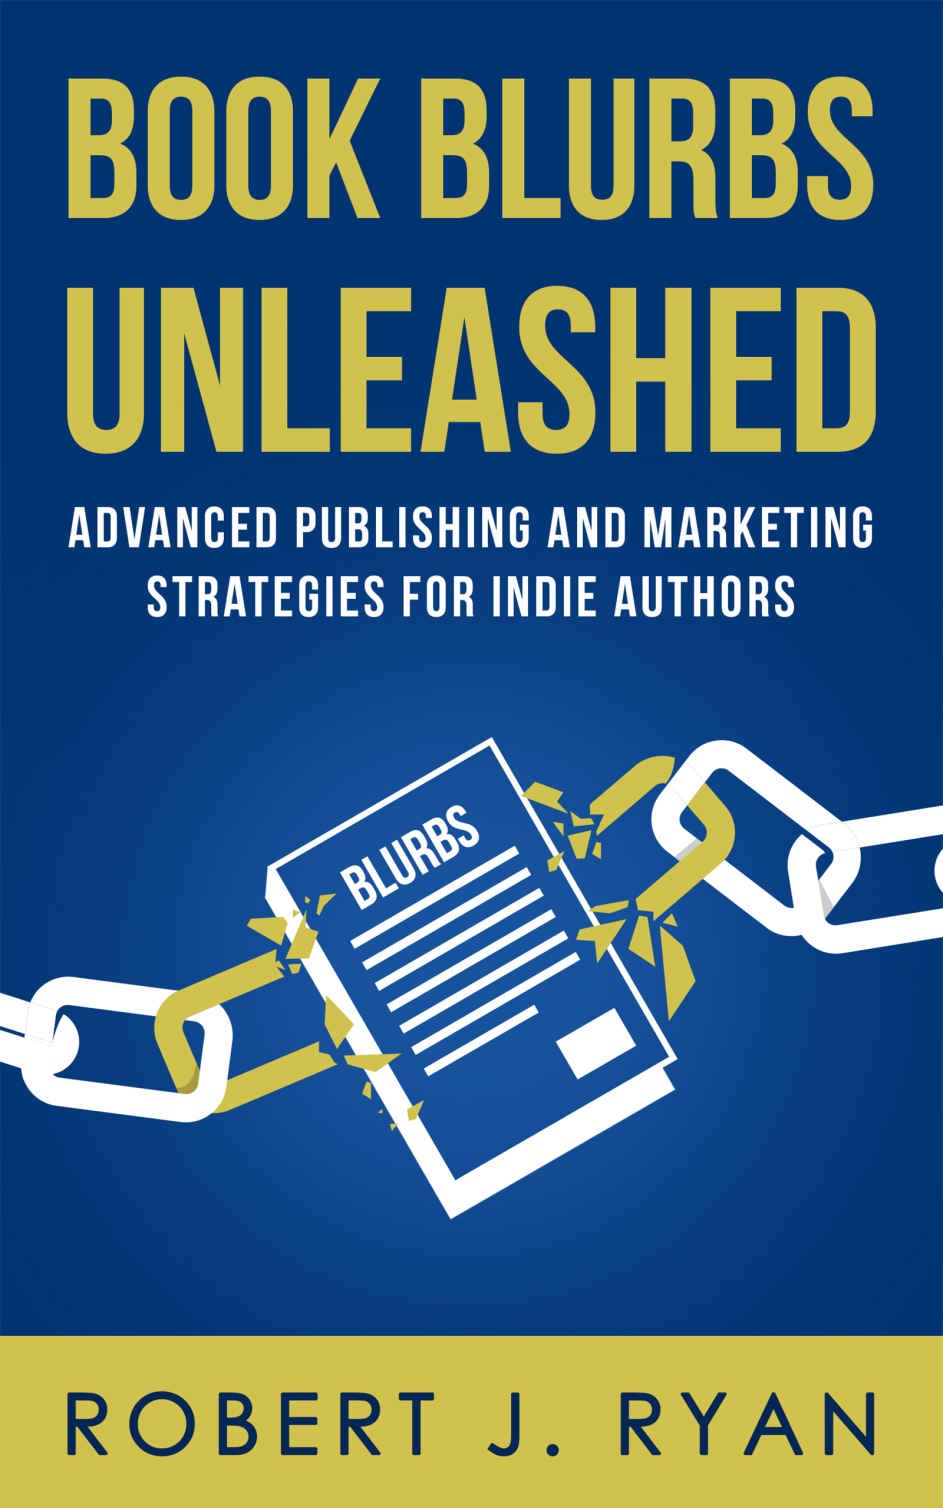 Robert J. Ryan: Book Blurbs Unleashed (2019, Independently Published)